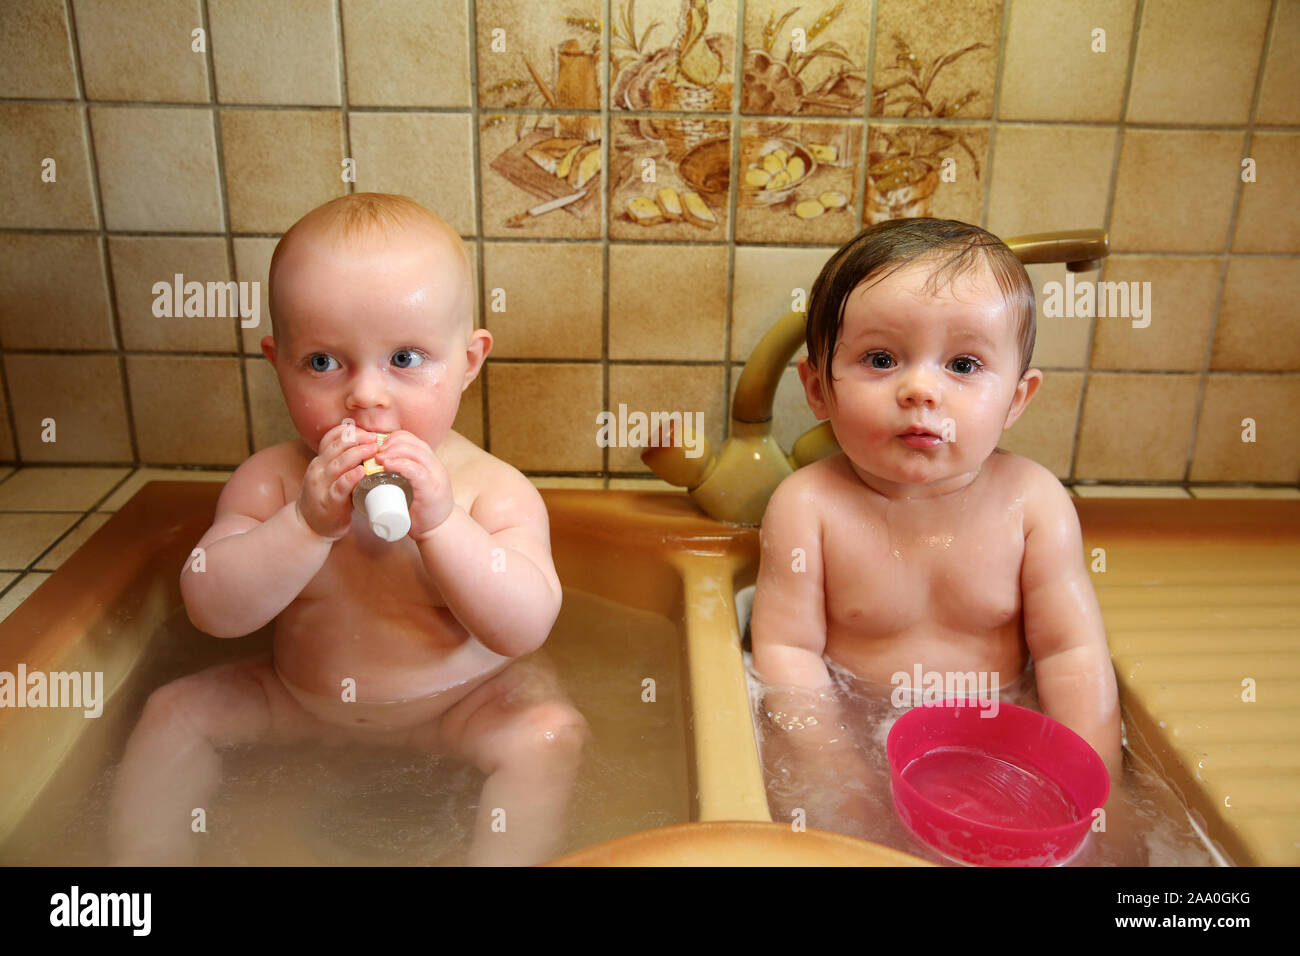 10 month old baby girls bathing in the kitchen sink Stock Photo